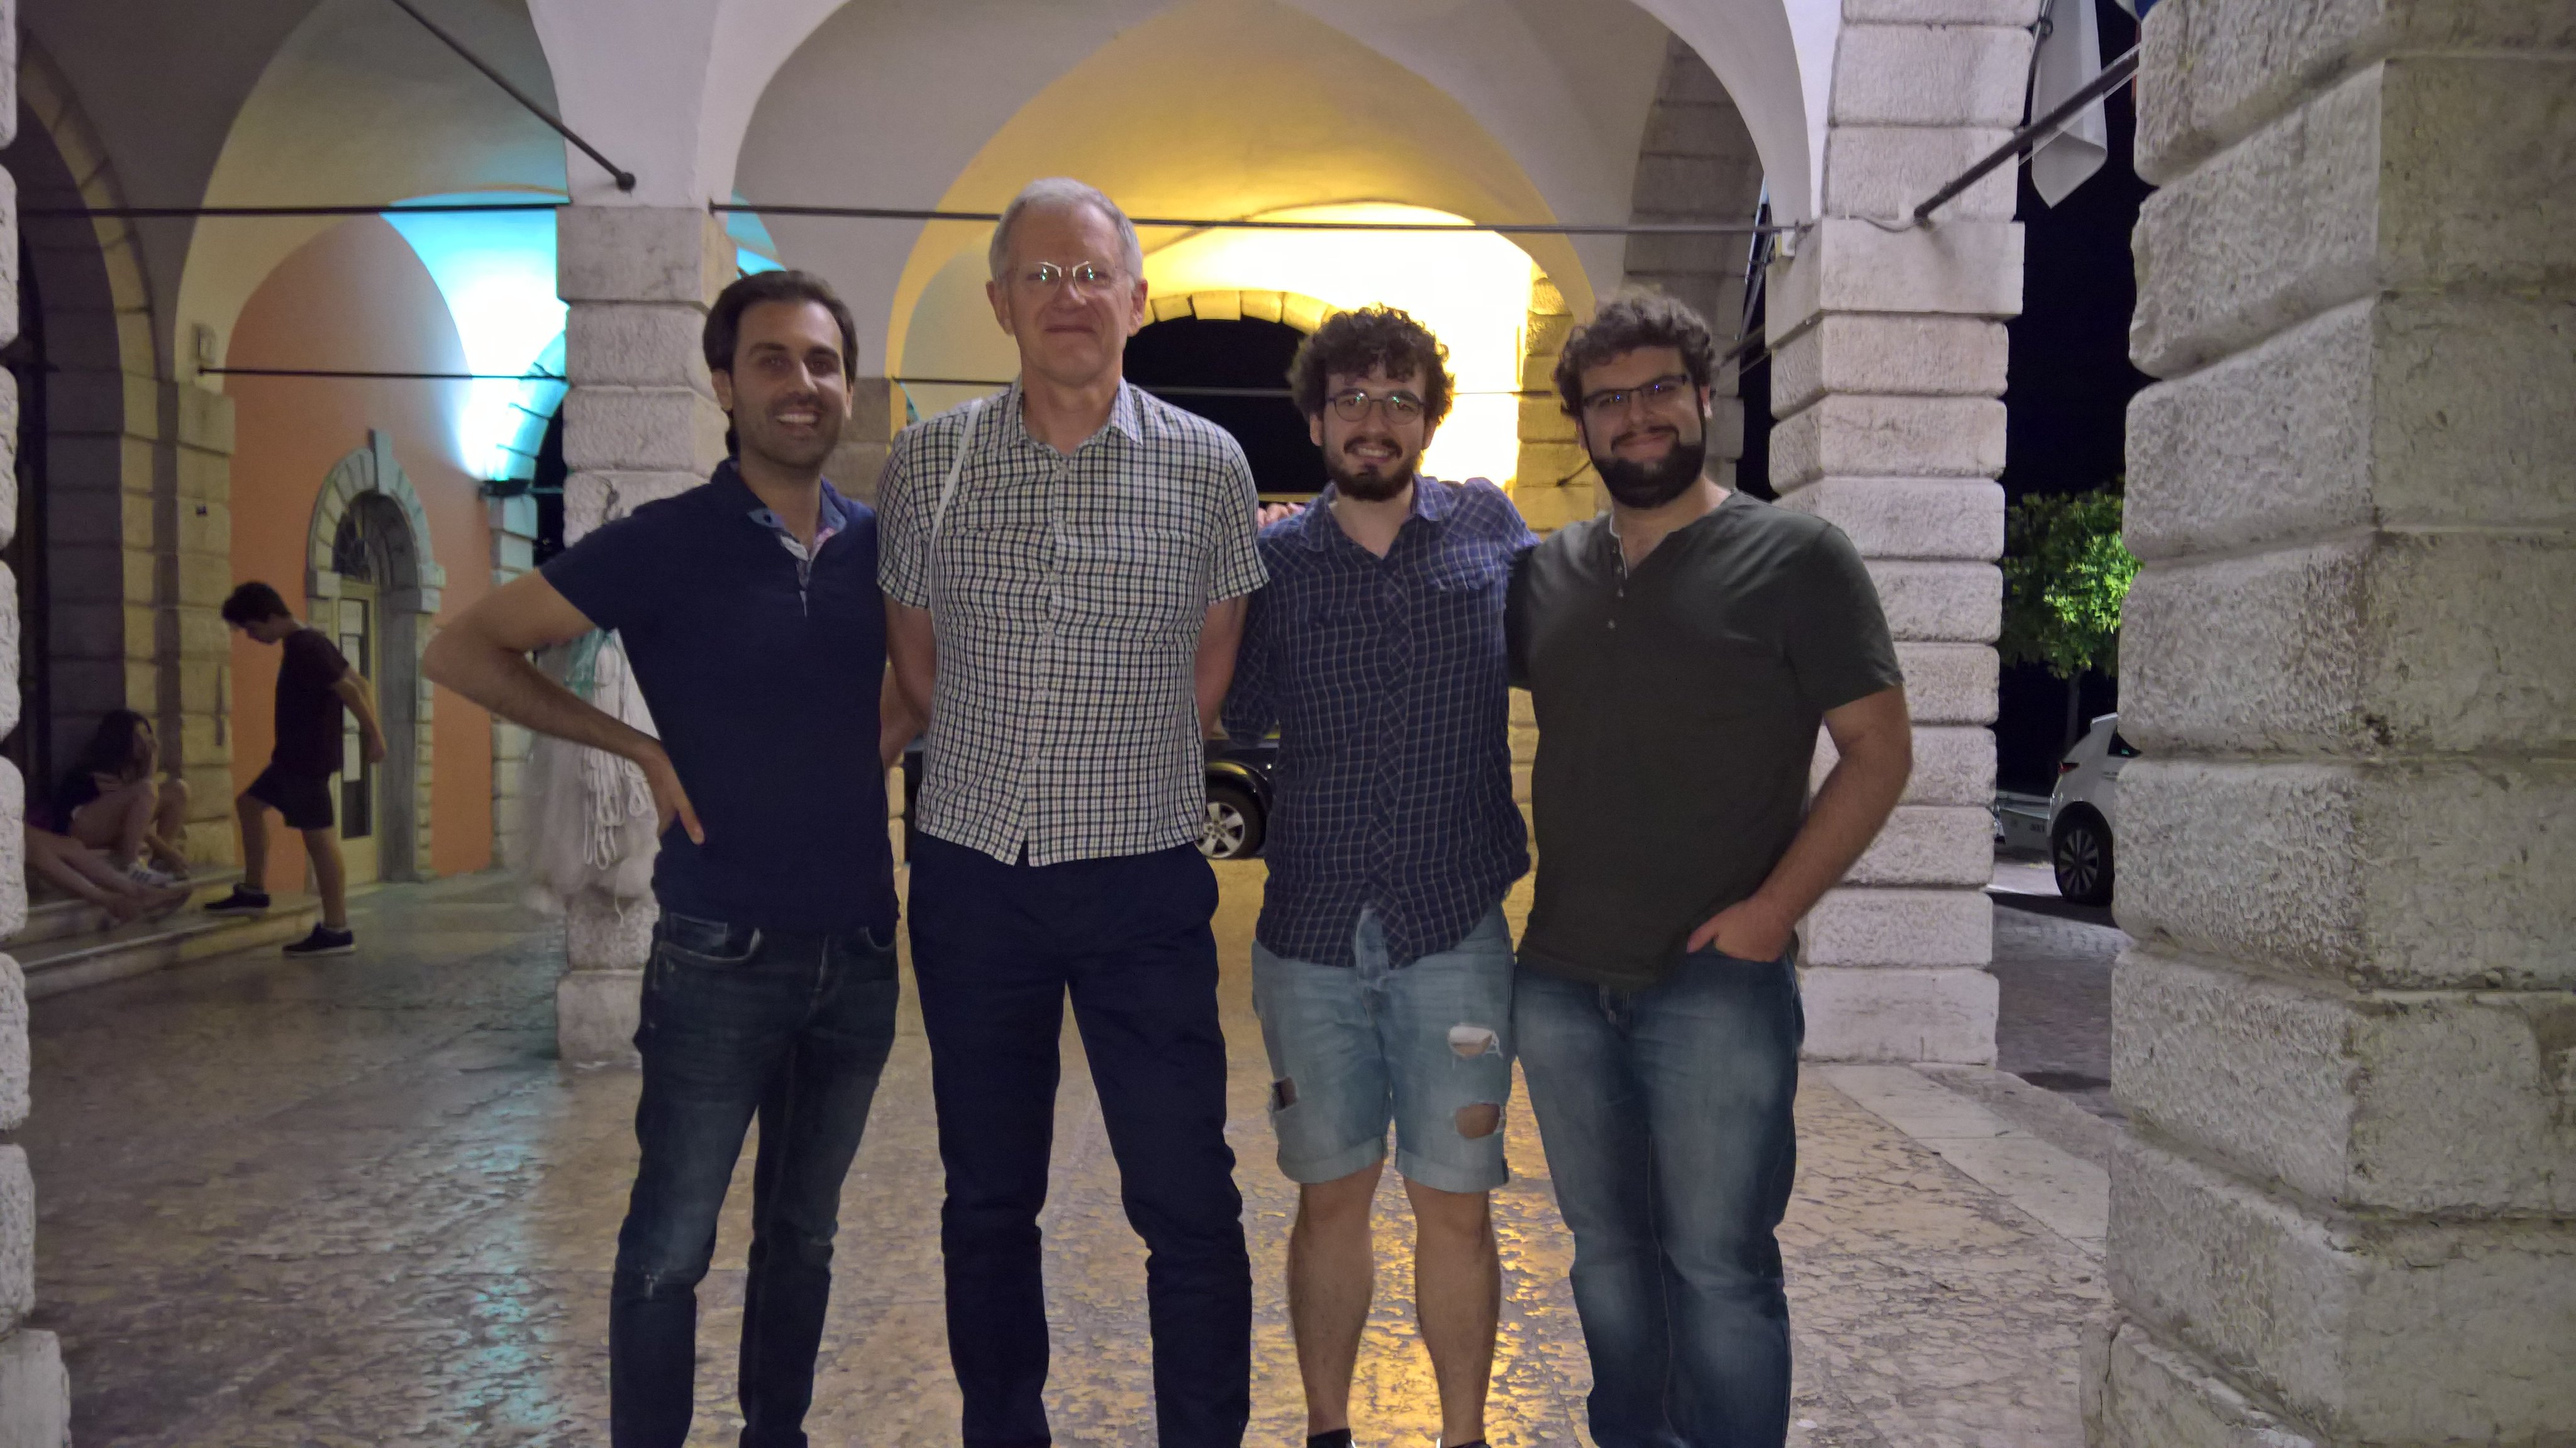 NanoMolCat Group on Twitter: "A short visit to #Gargnano at the Corbella #ISOS2018 to meet Karl Anker Jørgensen. It was a truly inspiring occasion for all us, hope to see